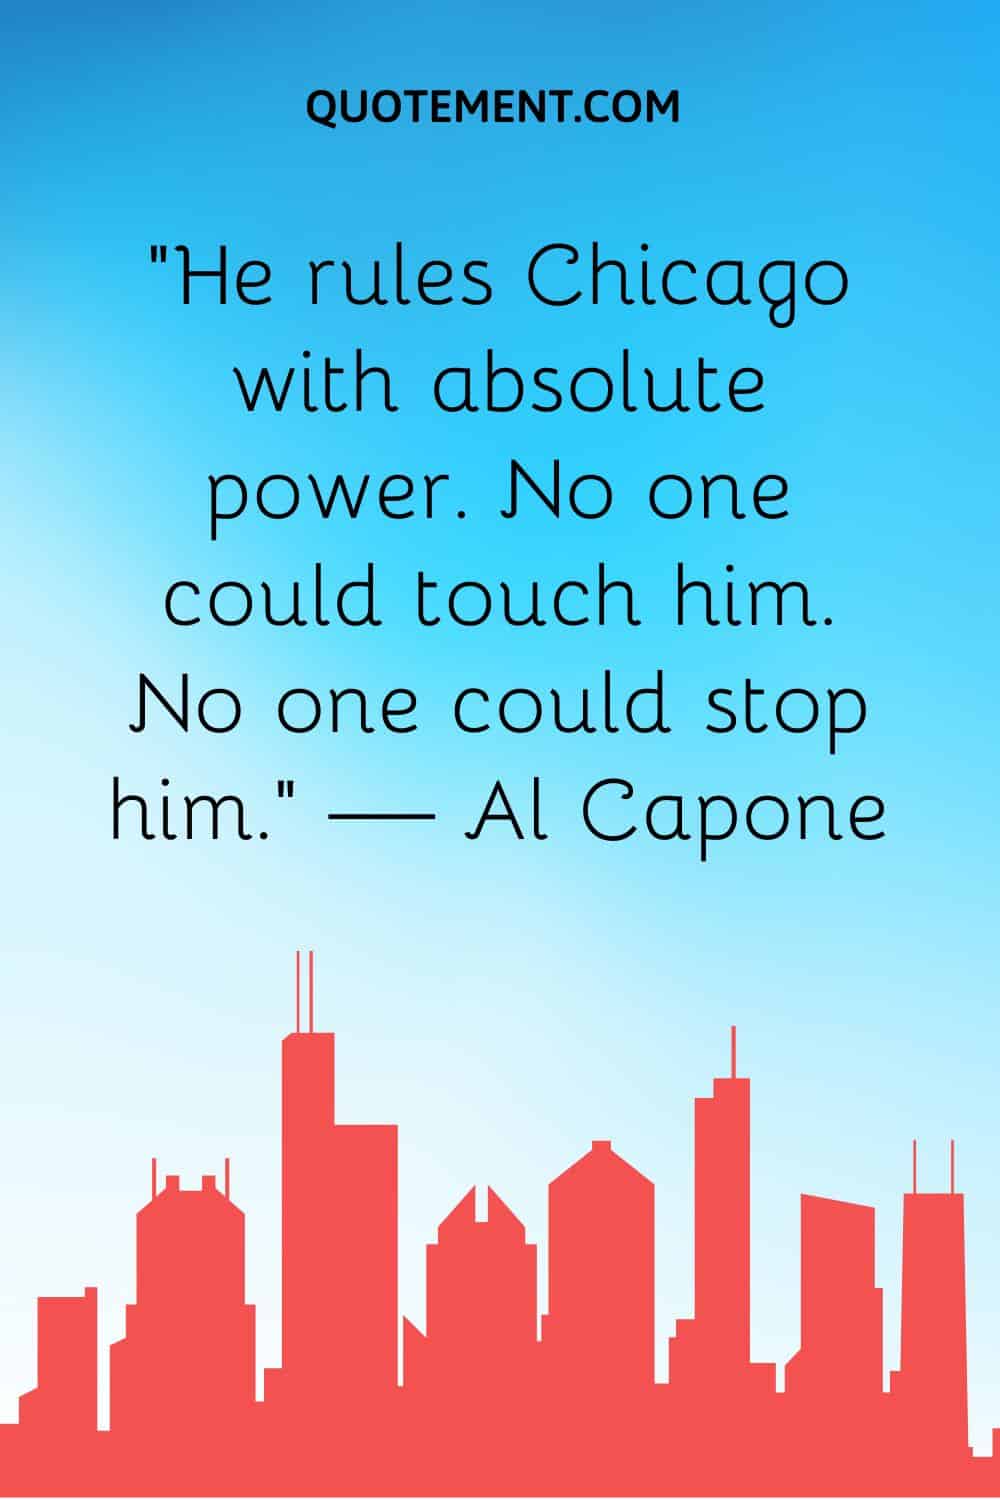 “He rules Chicago with absolute power. No one could touch him. No one could stop him.” — Al Capone